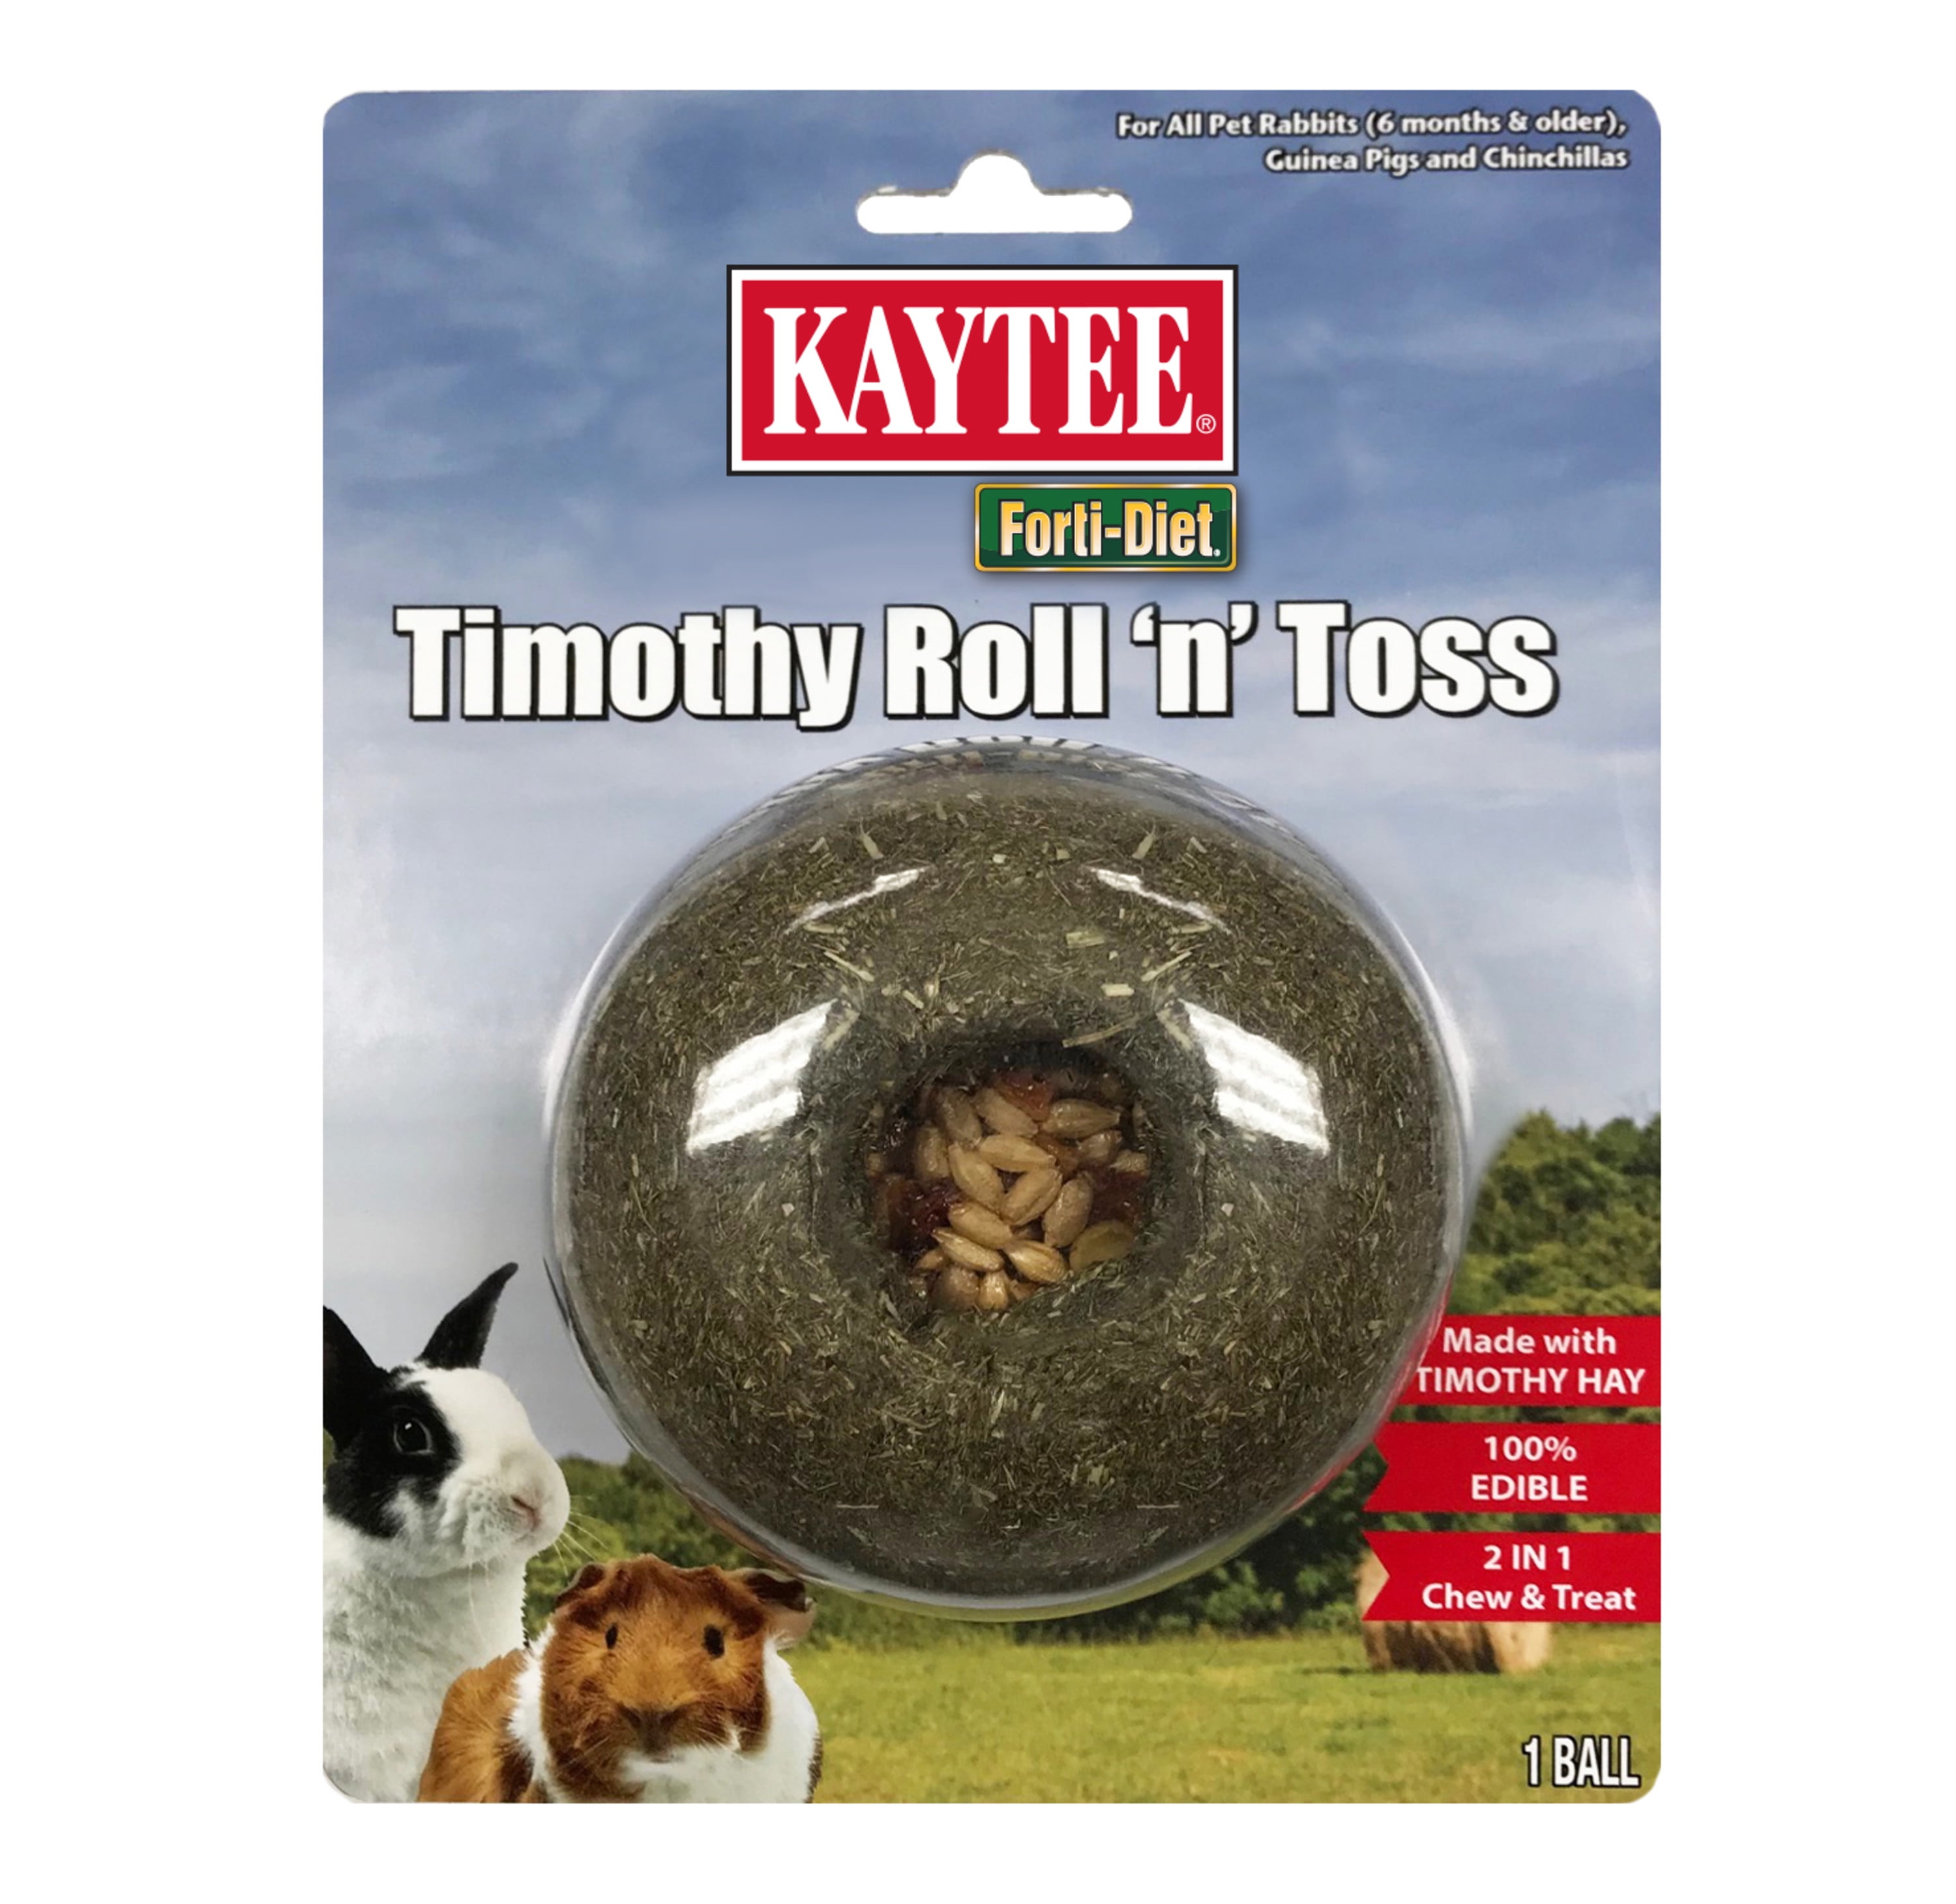 Kaytee Forti-Diet Timothy Hay Roll 'N' Toss Small Animal Chew Treat & Toy